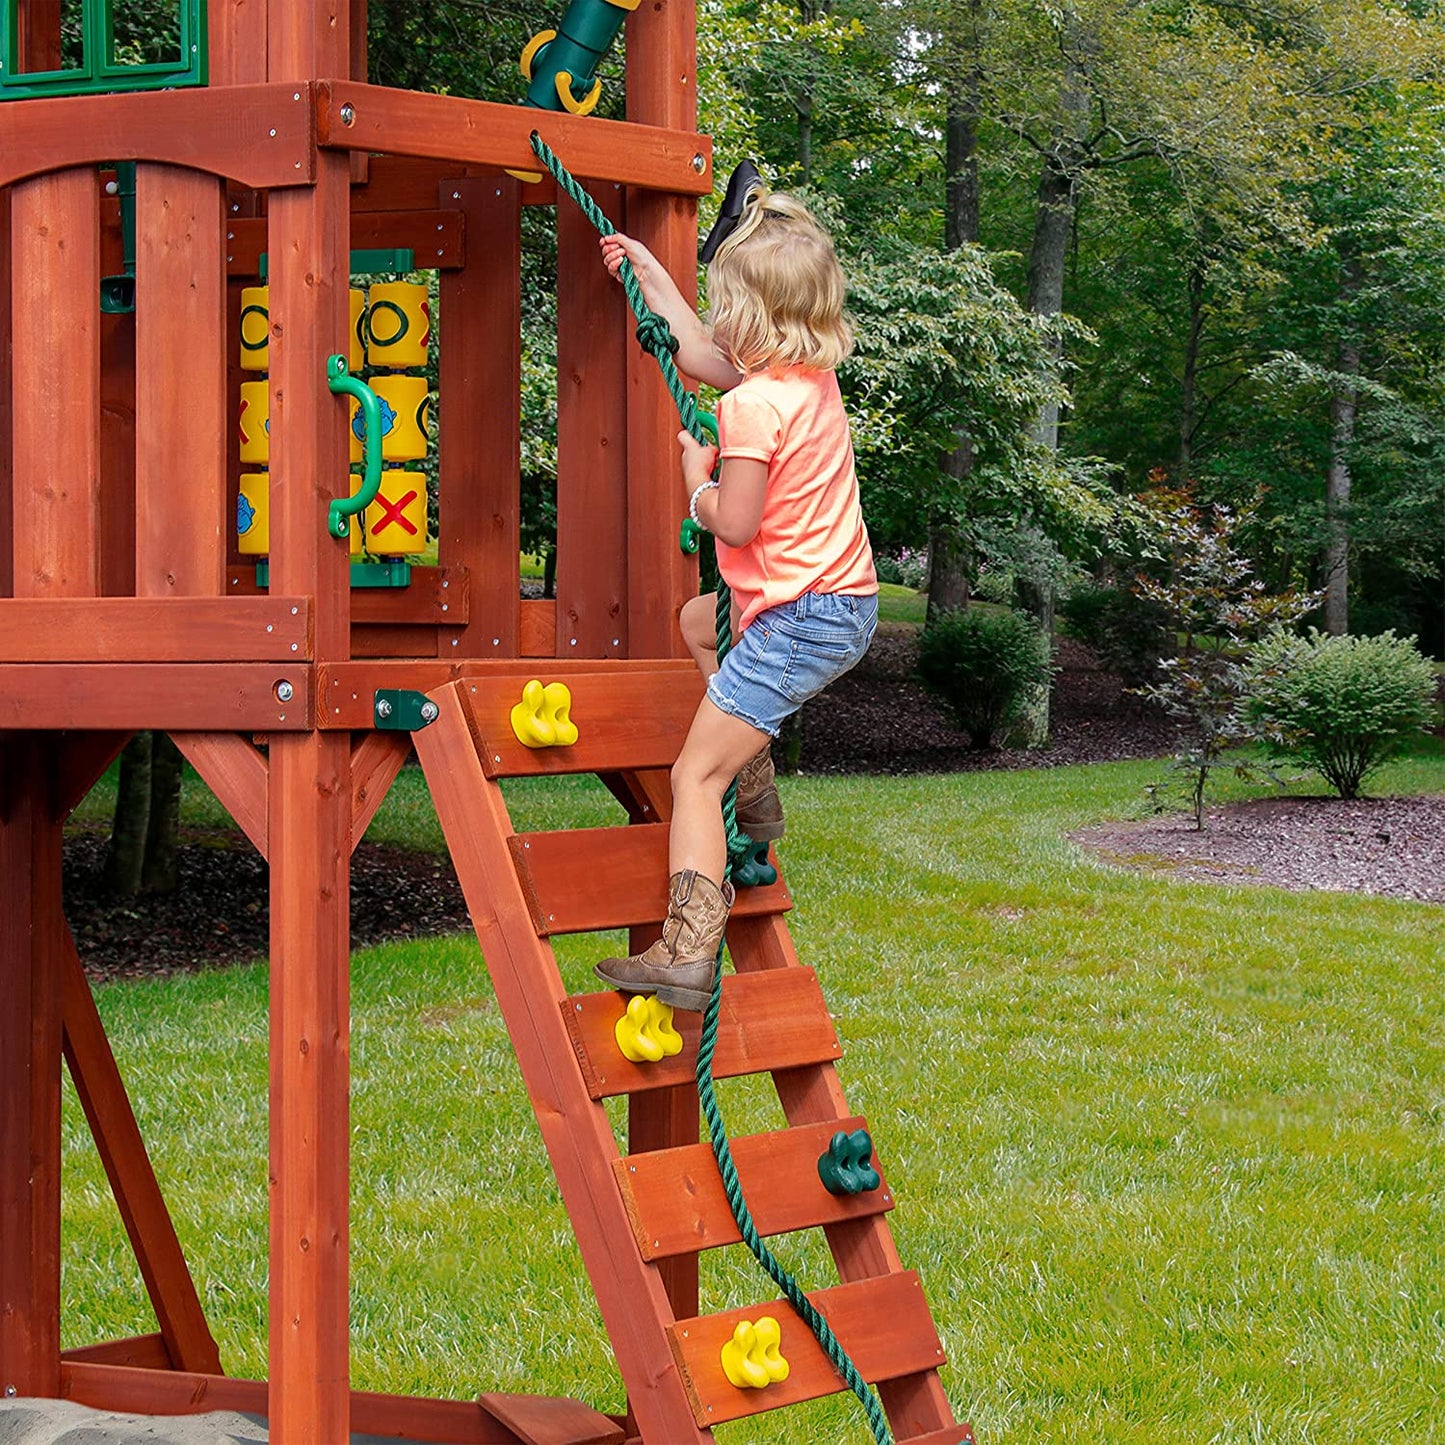 A close up of a child climbing up a small rock wall of a kids wooden outdoor playset.